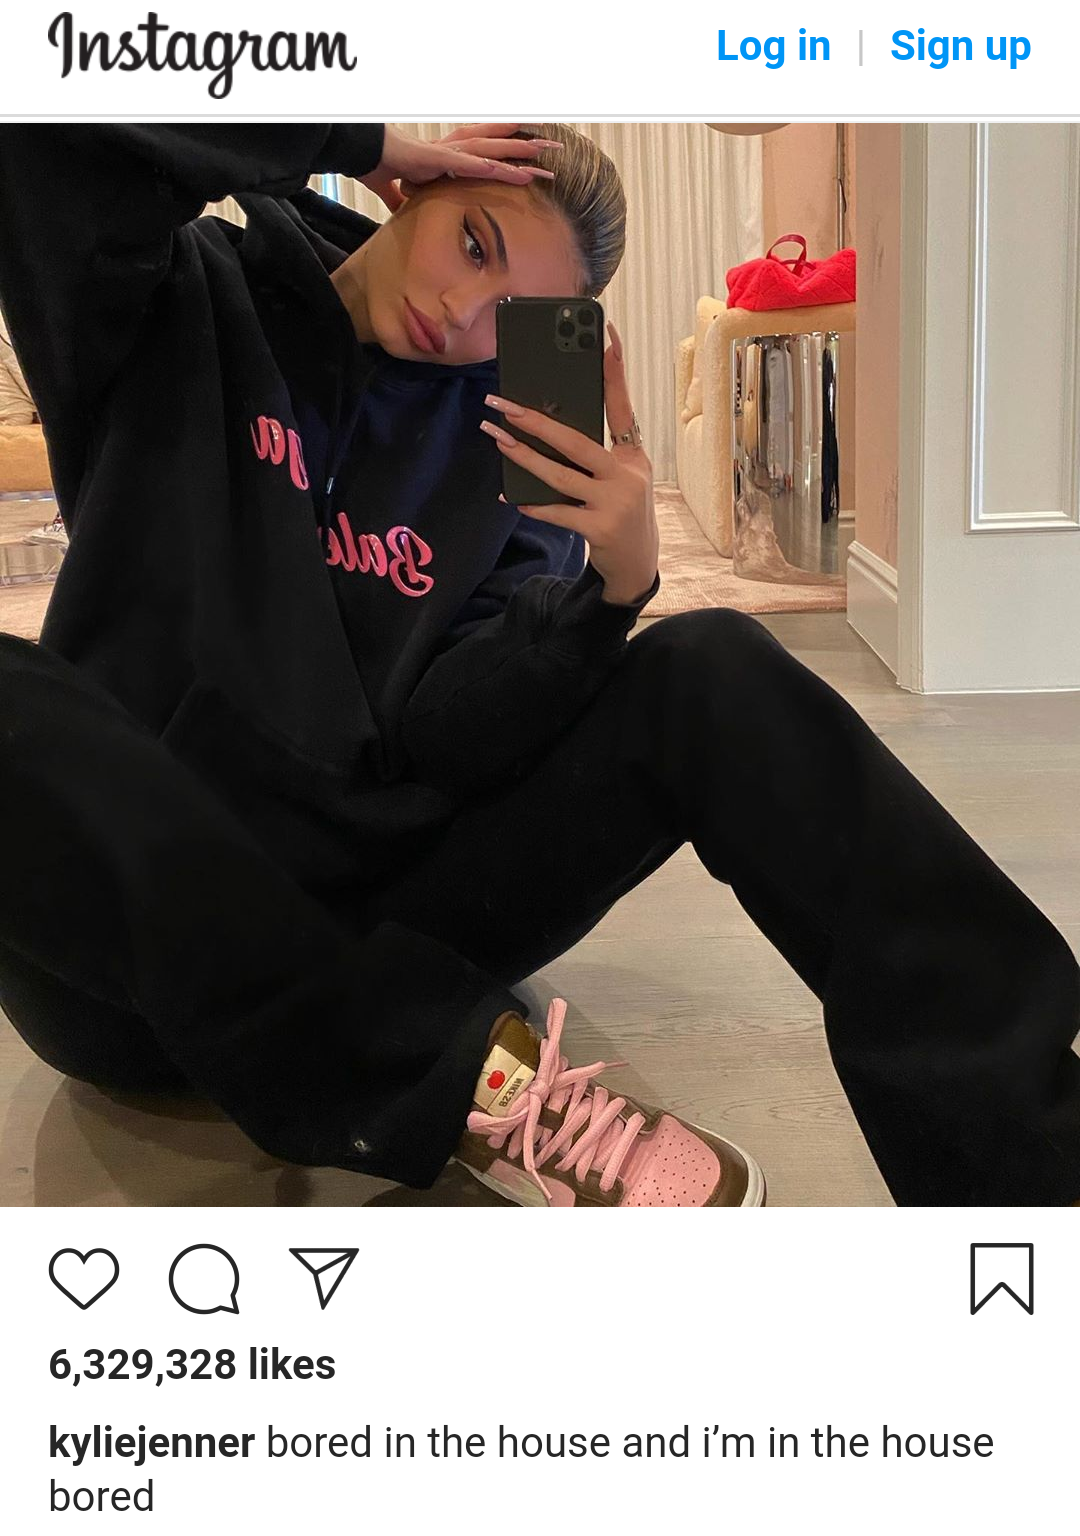 Kylie Jenner on Instagram, dated March 28